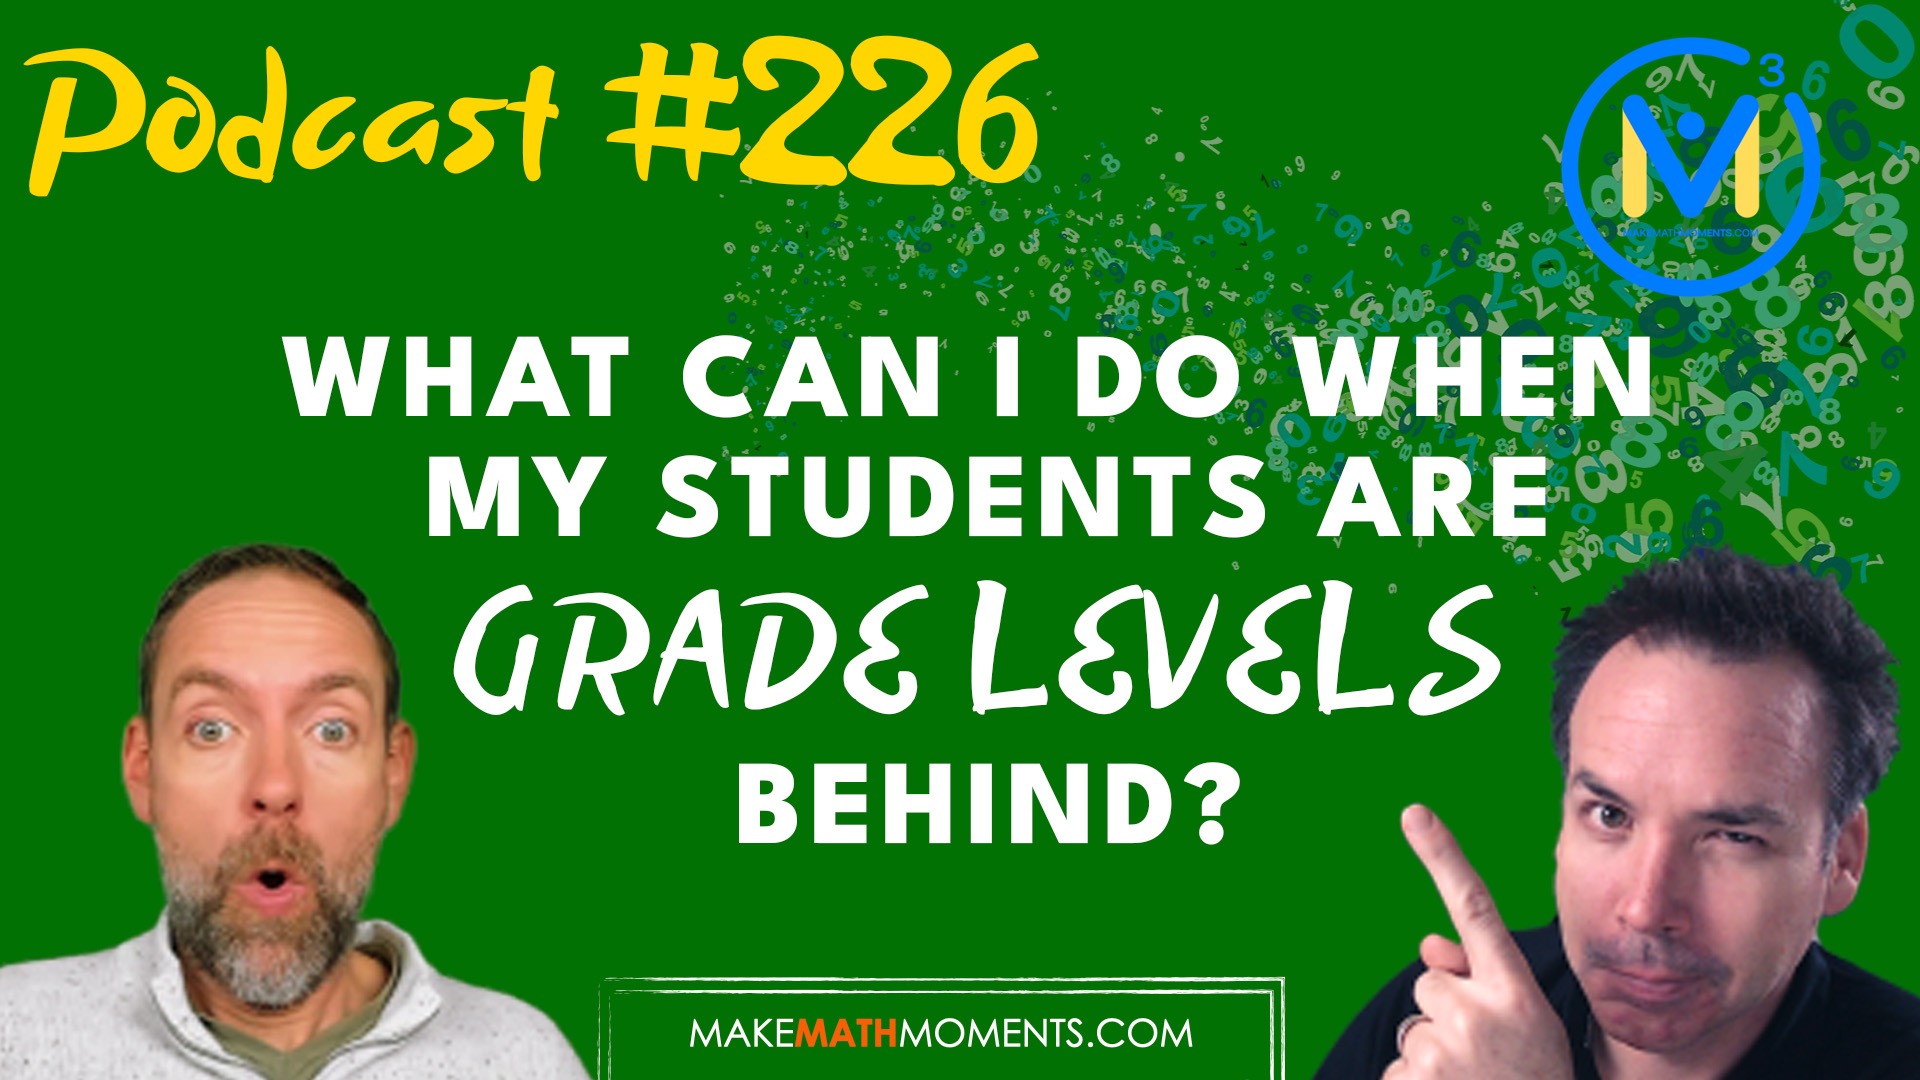 Episode 226: What Can I Do When My Students Are Grade Levels Behind?